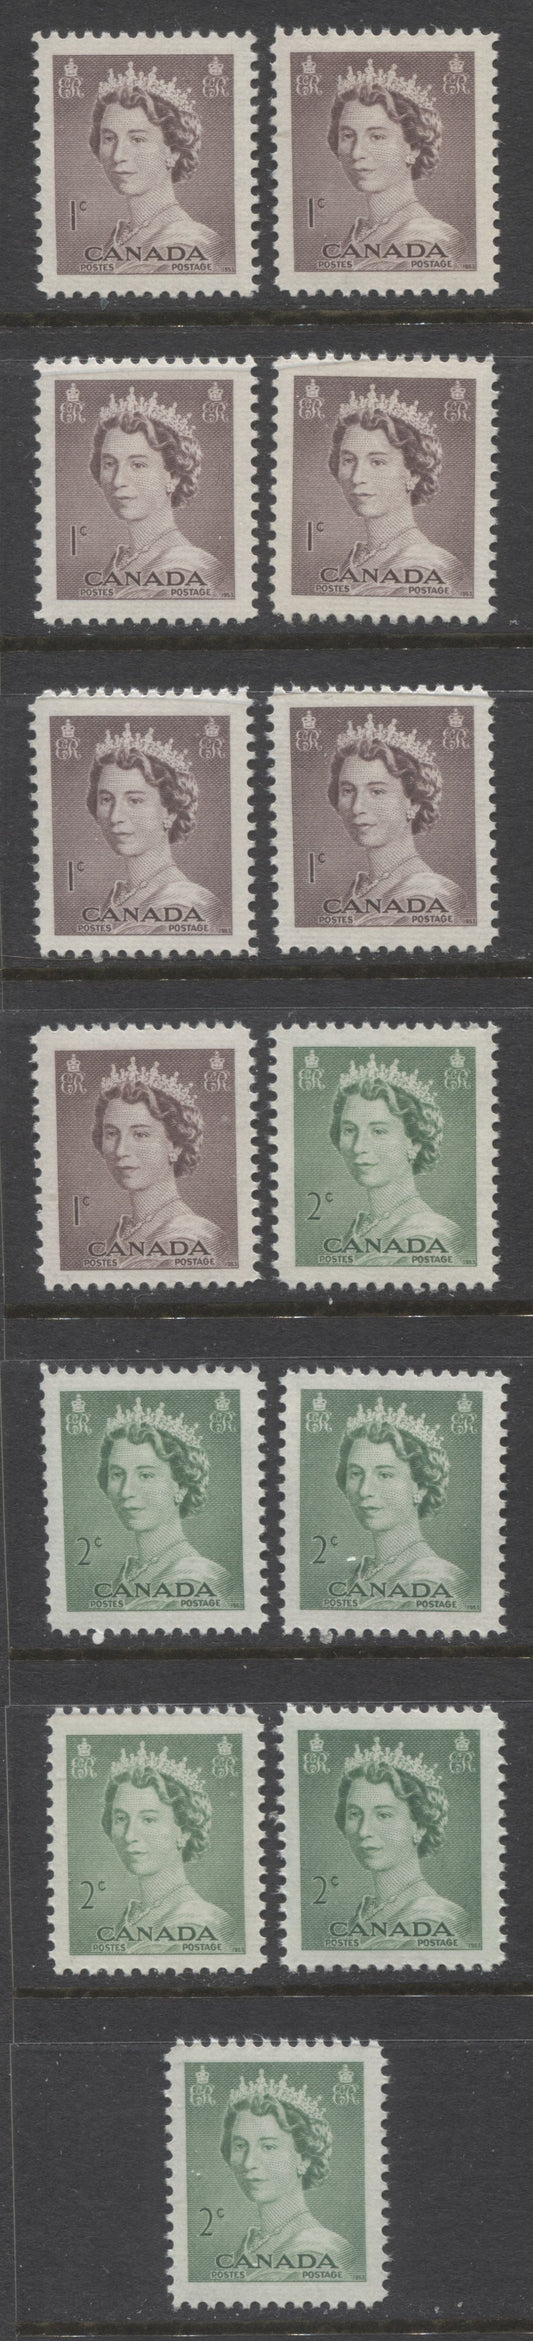 Lot 230 Canada #325-326 1c-2c Violet Brown & Pale Green Queen Elizabeth II, 1953-1954 Karsh Issue, 13 VFNH Singles, Various Shades, Many Different Perfs